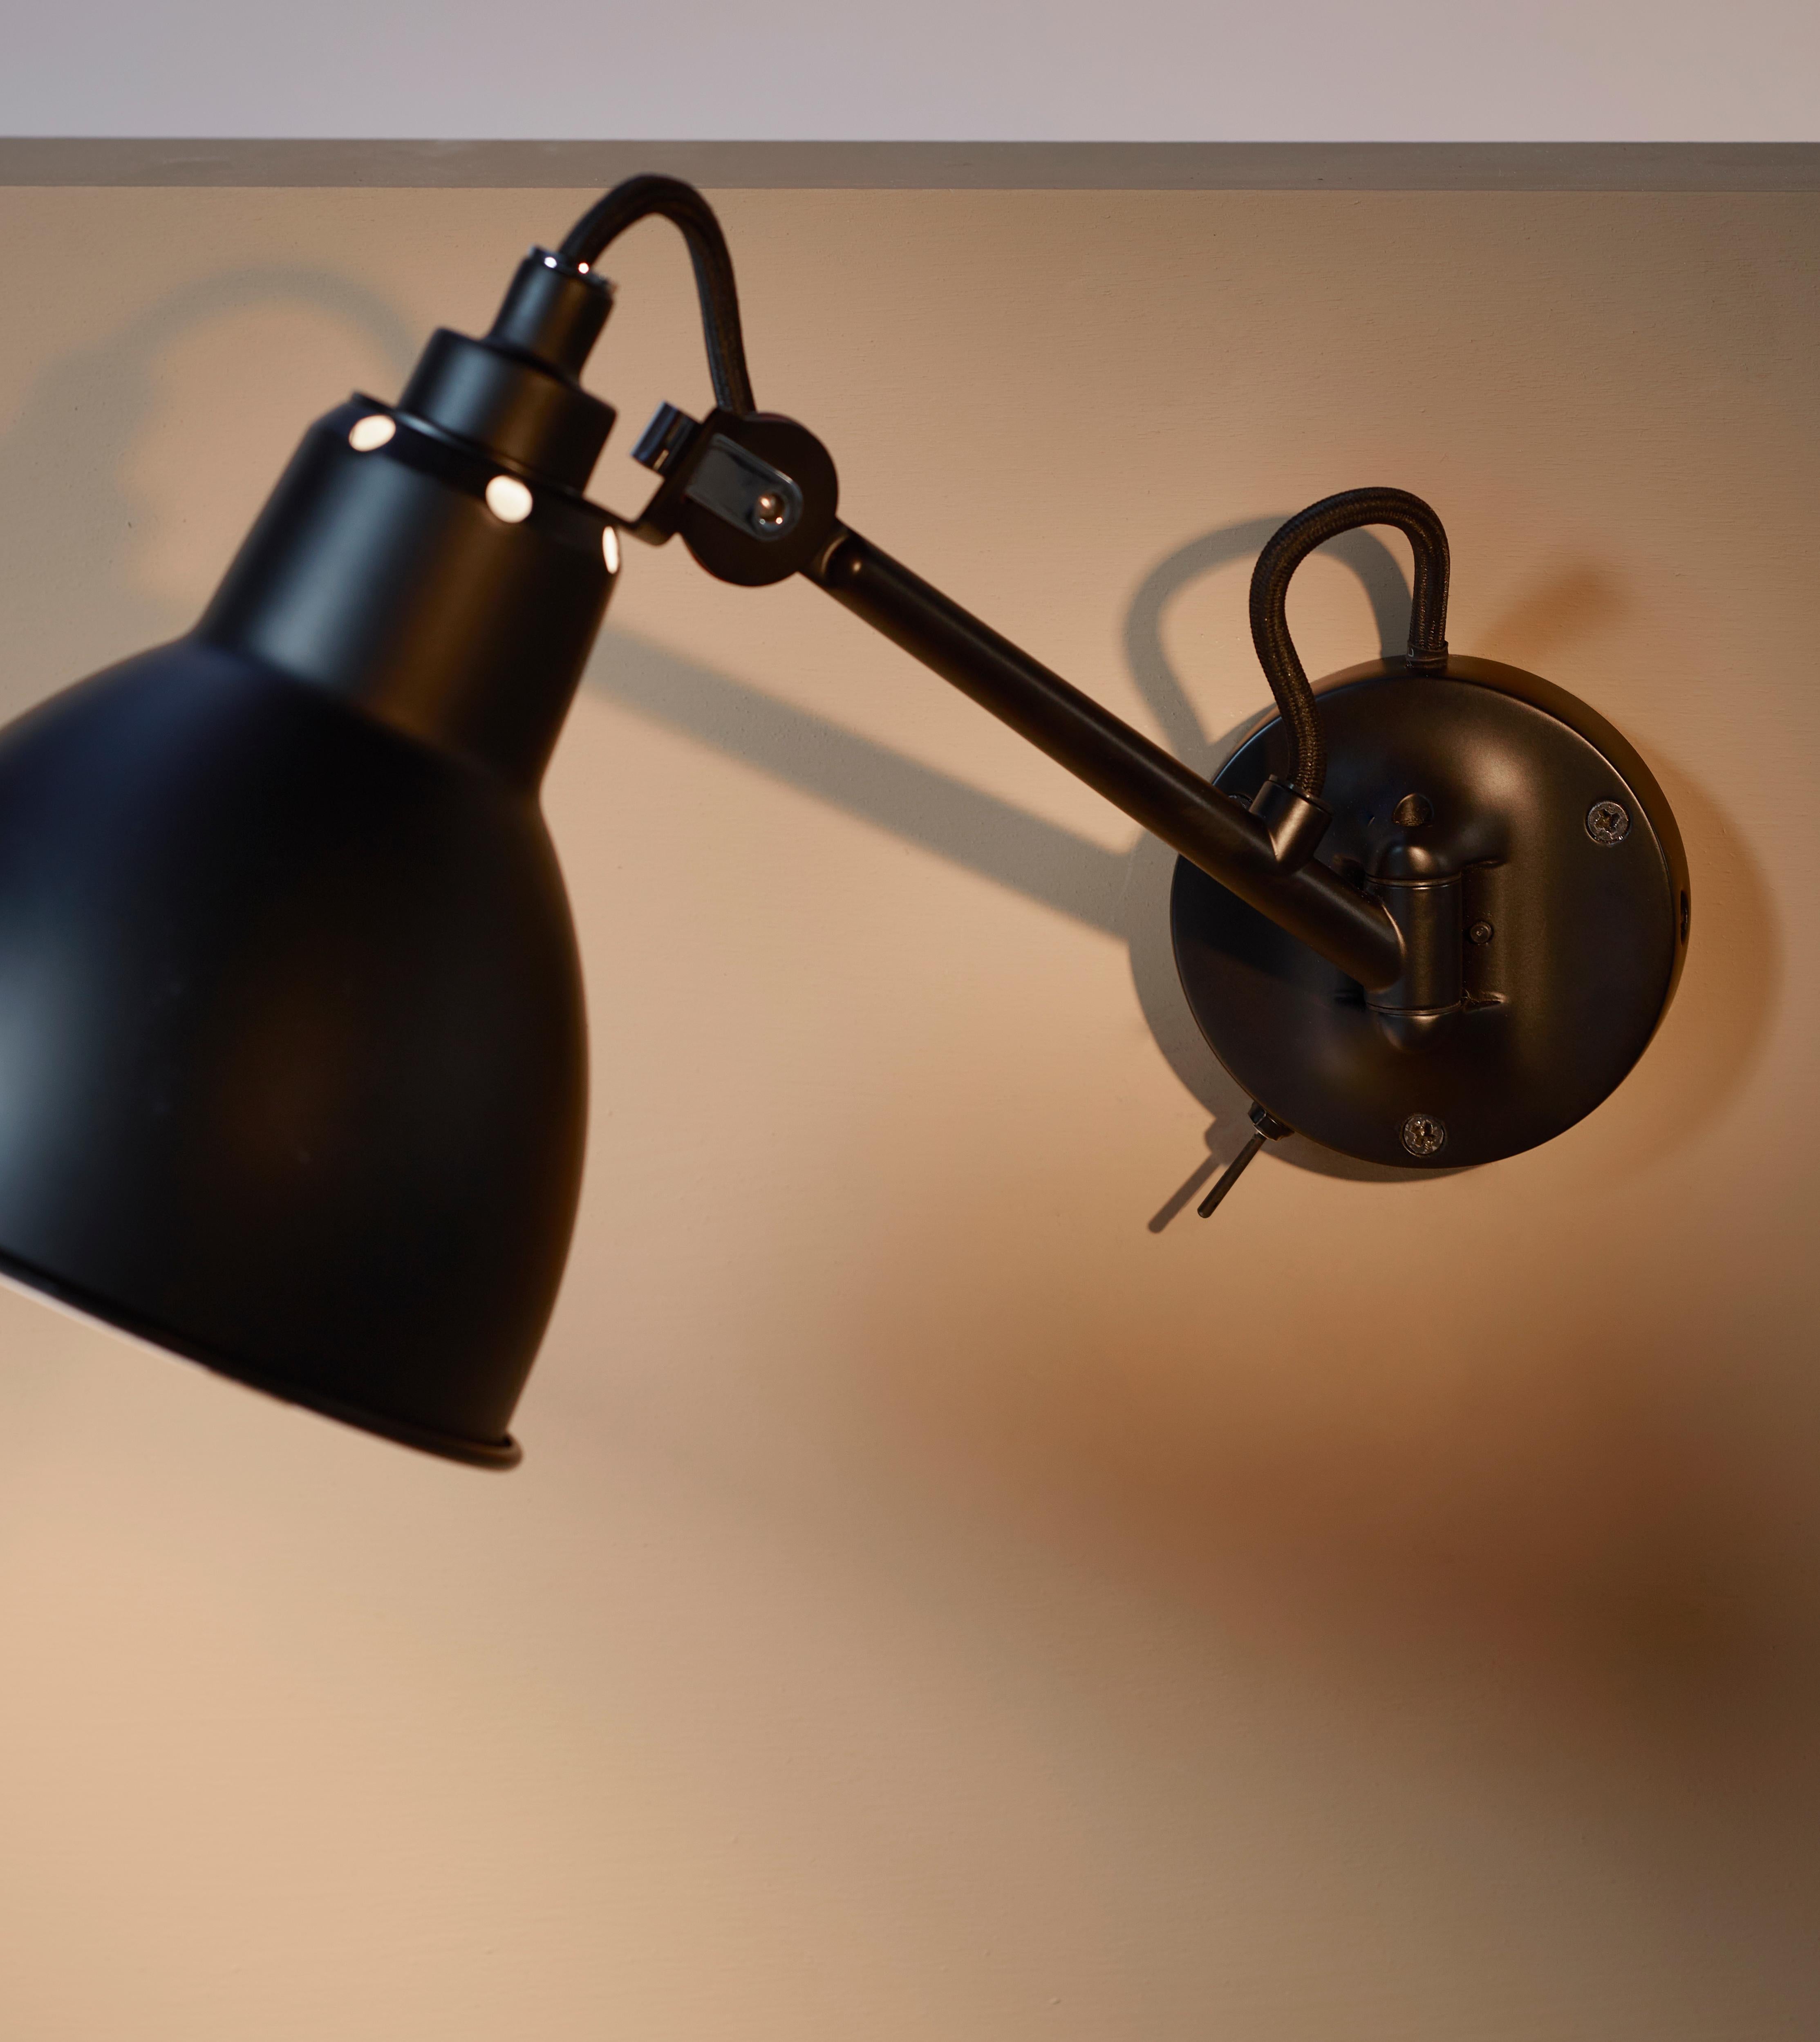 DCW Editions La Lampe Gras N°104 SW Wall Lamp in Black Steel Arm and Yellow Shade by Bernard-Albin Gras
 
 In 1921 Bernard-Albin GRAS designed a series of lamps for use in offices and in industrial environments. The GRAS lamp, as it was subsequently